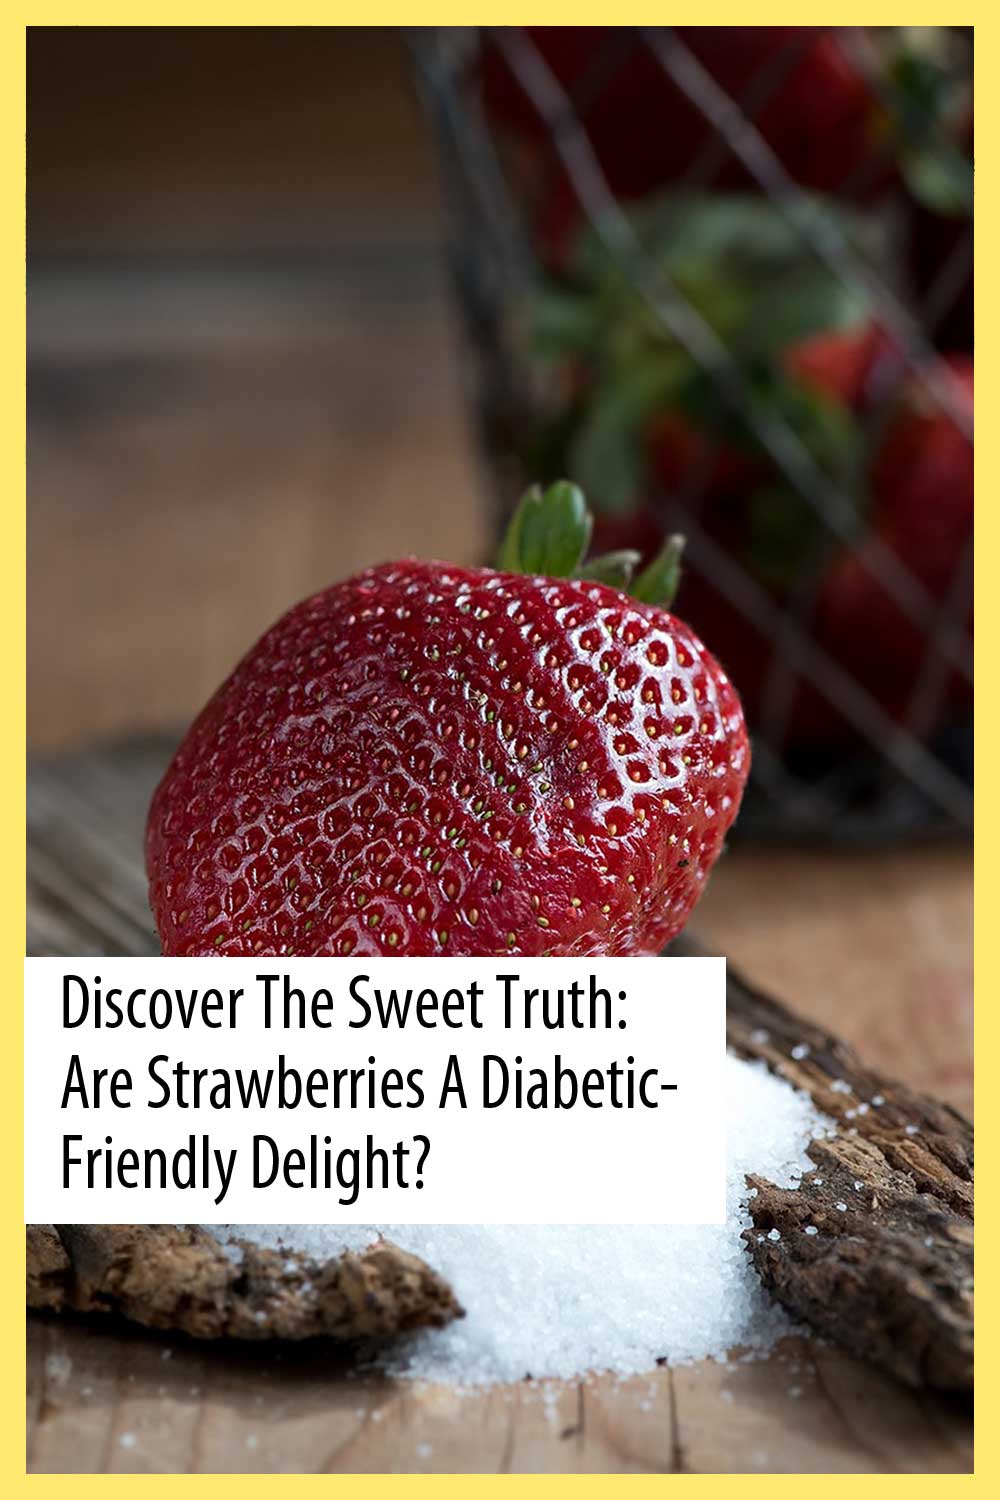 Discover the Sweet Truth: Are Strawberries a Diabetic-Friendly Delight?